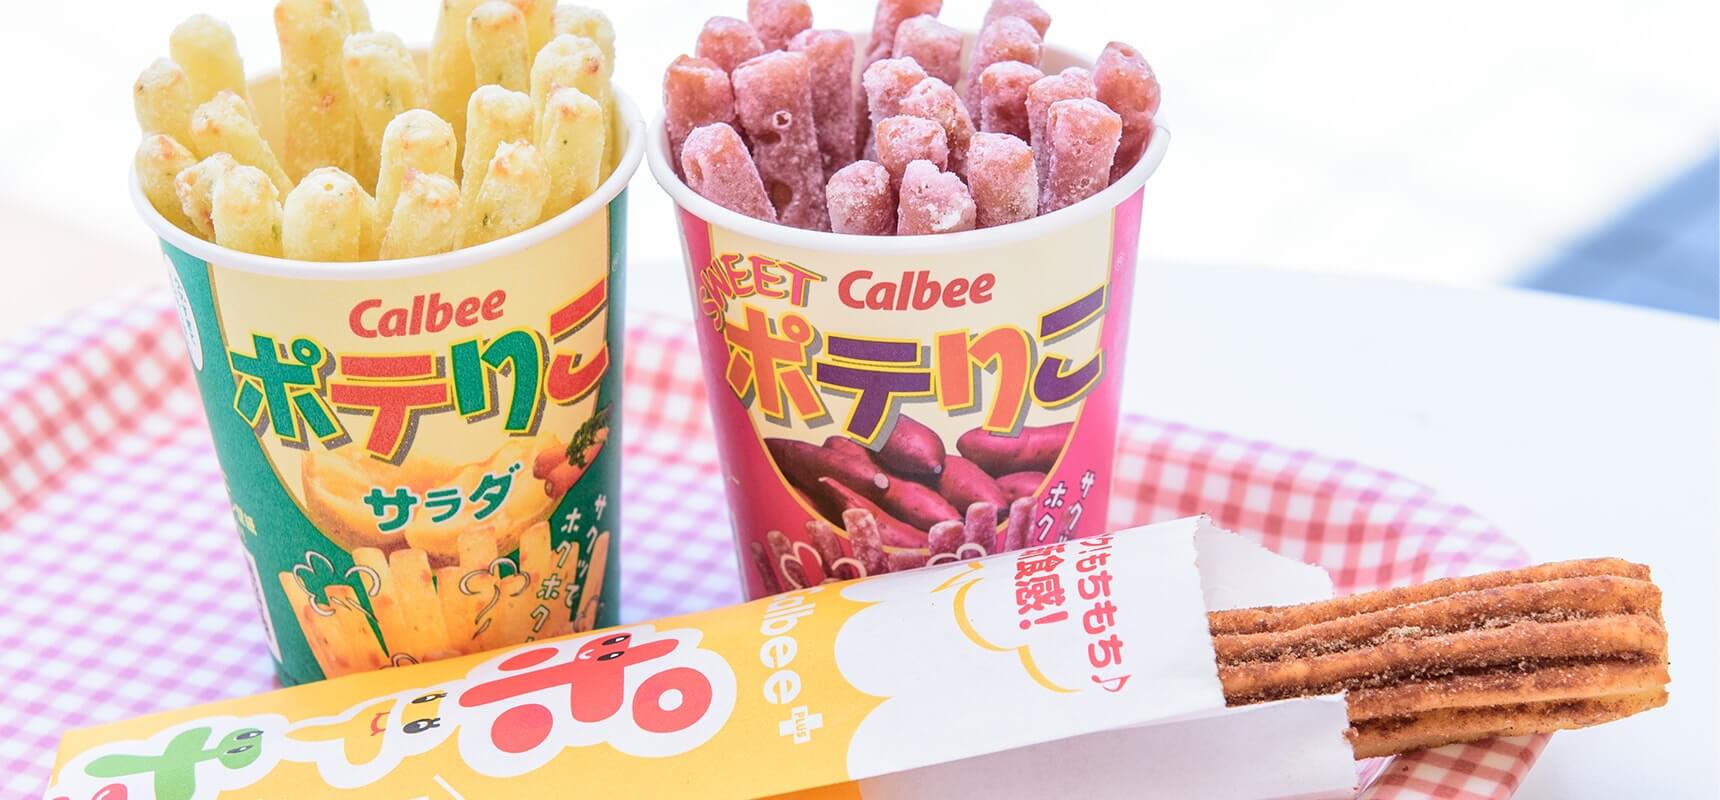 Check out Calbee+ Okinawa Kokusaidori Street. It’s full of deliciousness!